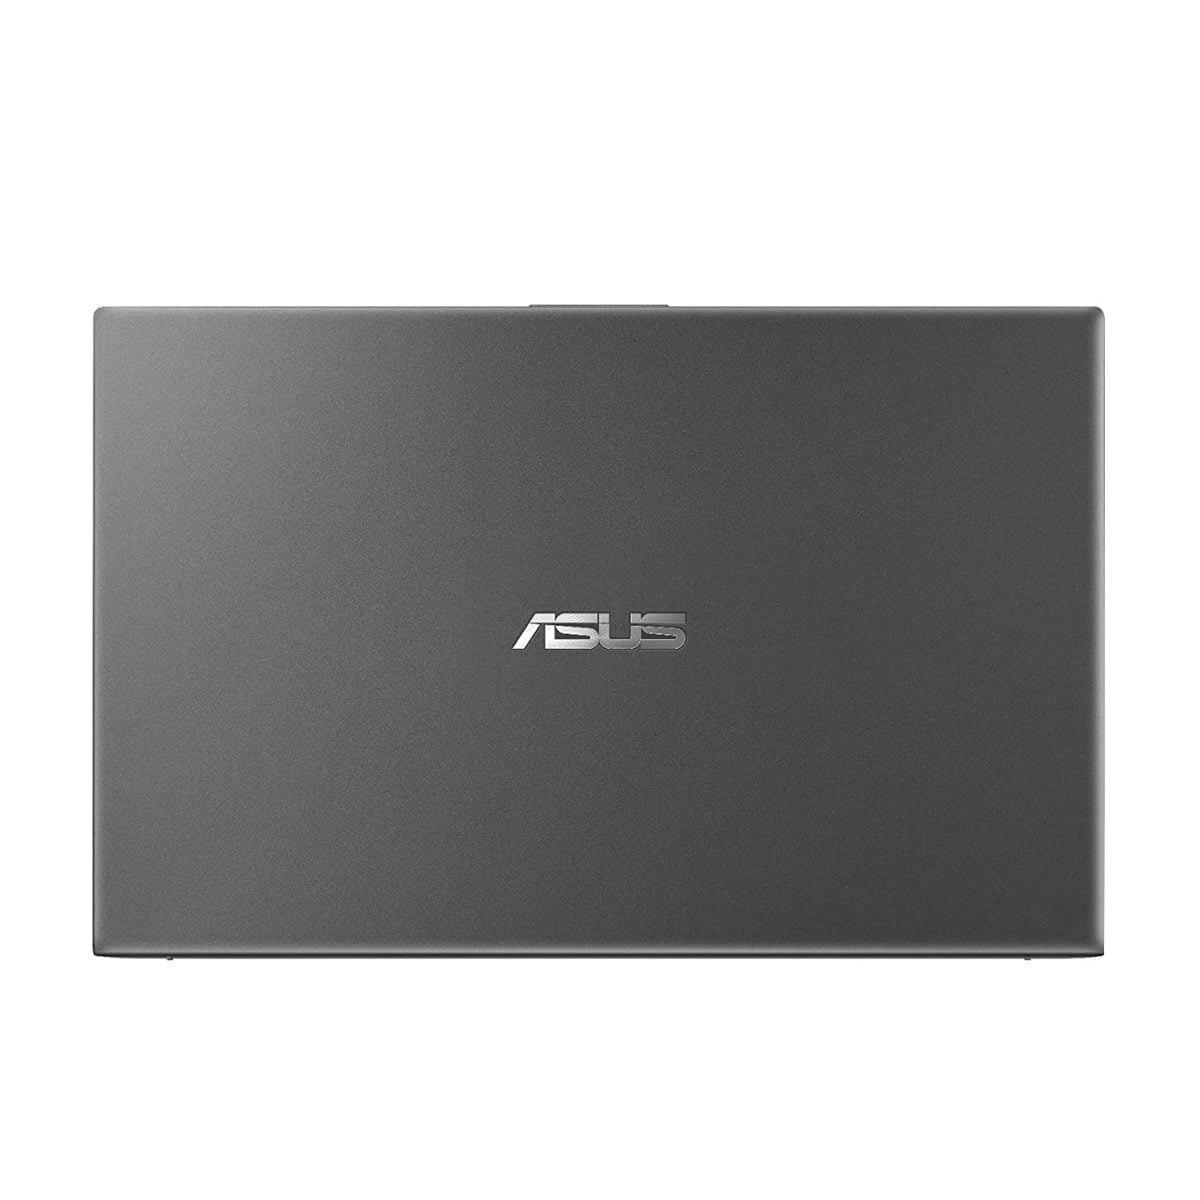 Asus &Lt;H1 Id=&Quot;Title&Quot; Class=&Quot;A-Size-Large A-Spacing-None&Quot;&Gt;&Lt;Span Id=&Quot;Producttitle&Quot; Class=&Quot;A-Size-Large Product-Title-Word-Break&Quot;&Gt;Asus Vivobook - &Lt;/Span&Gt;15.6 Full Hd Touch Display, 10Th Generation Intel Core I7-1065G7, 8Gb Ram, 1Tb Hdd + 256 Gb Ssd Windows 10&Lt;/H1&Gt; &Lt;Div Class=&Quot;Embedded-Component-Container Lv Product-Description&Quot;&Gt; &Lt;Div Id=&Quot;Shop-Product-Description-24356640&Quot; Class=&Quot;None&Quot; Data-Version=&Quot;1.3.38&Quot;&Gt; &Lt;Div Class=&Quot;Shop-Product-Description&Quot;&Gt;&Lt;Section Class=&Quot;Align-Heading-Left&Quot; Data-Reactroot=&Quot;&Quot;&Gt; &Lt;Div Class=&Quot;Long-Description-Container Body-Copy &Quot;&Gt; &Lt;Div Class=&Quot;Html-Fragment&Quot;&Gt; &Lt;Div&Gt; &Lt;Div&Gt;Asus Vivobook Laptop. Enjoy Everyday Activities With This Asus Notebook Pc. The Intel Core I7 Processor And 8Gb Of Ram Let You Run Programs Smoothly, On The 15.6-Inch Fhd Display. This Asus Notebook Pc Has 1Tb + 256Gb Ssd That Shortens Load Times And Offers Ample Storage.&Lt;/Div&Gt; &Lt;Div&Gt;&Lt;/Div&Gt; &Lt;Pre&Gt;One Year Warranty&Lt;/Pre&Gt; &Lt;/Div&Gt; &Lt;/Div&Gt; &Lt;/Div&Gt; &Lt;/Section&Gt;&Lt;/Div&Gt; &Lt;/Div&Gt; &Lt;/Div&Gt; &Lt;Div Class=&Quot;Embedded-Component-Container Lv Product-Features&Quot;&Gt; &Lt;Div Class=&Quot;Embedded-Divider&Quot;&Gt;&Lt;/Div&Gt; &Lt;/Div&Gt; Asus Vivobook Asus Vivobook 15.6 Inch Touch Display, 10Th Gen Core I7-1065G7, 8Gb Ram, 1Tb Hdd Plus 256Gb Ssd ,Windows 10